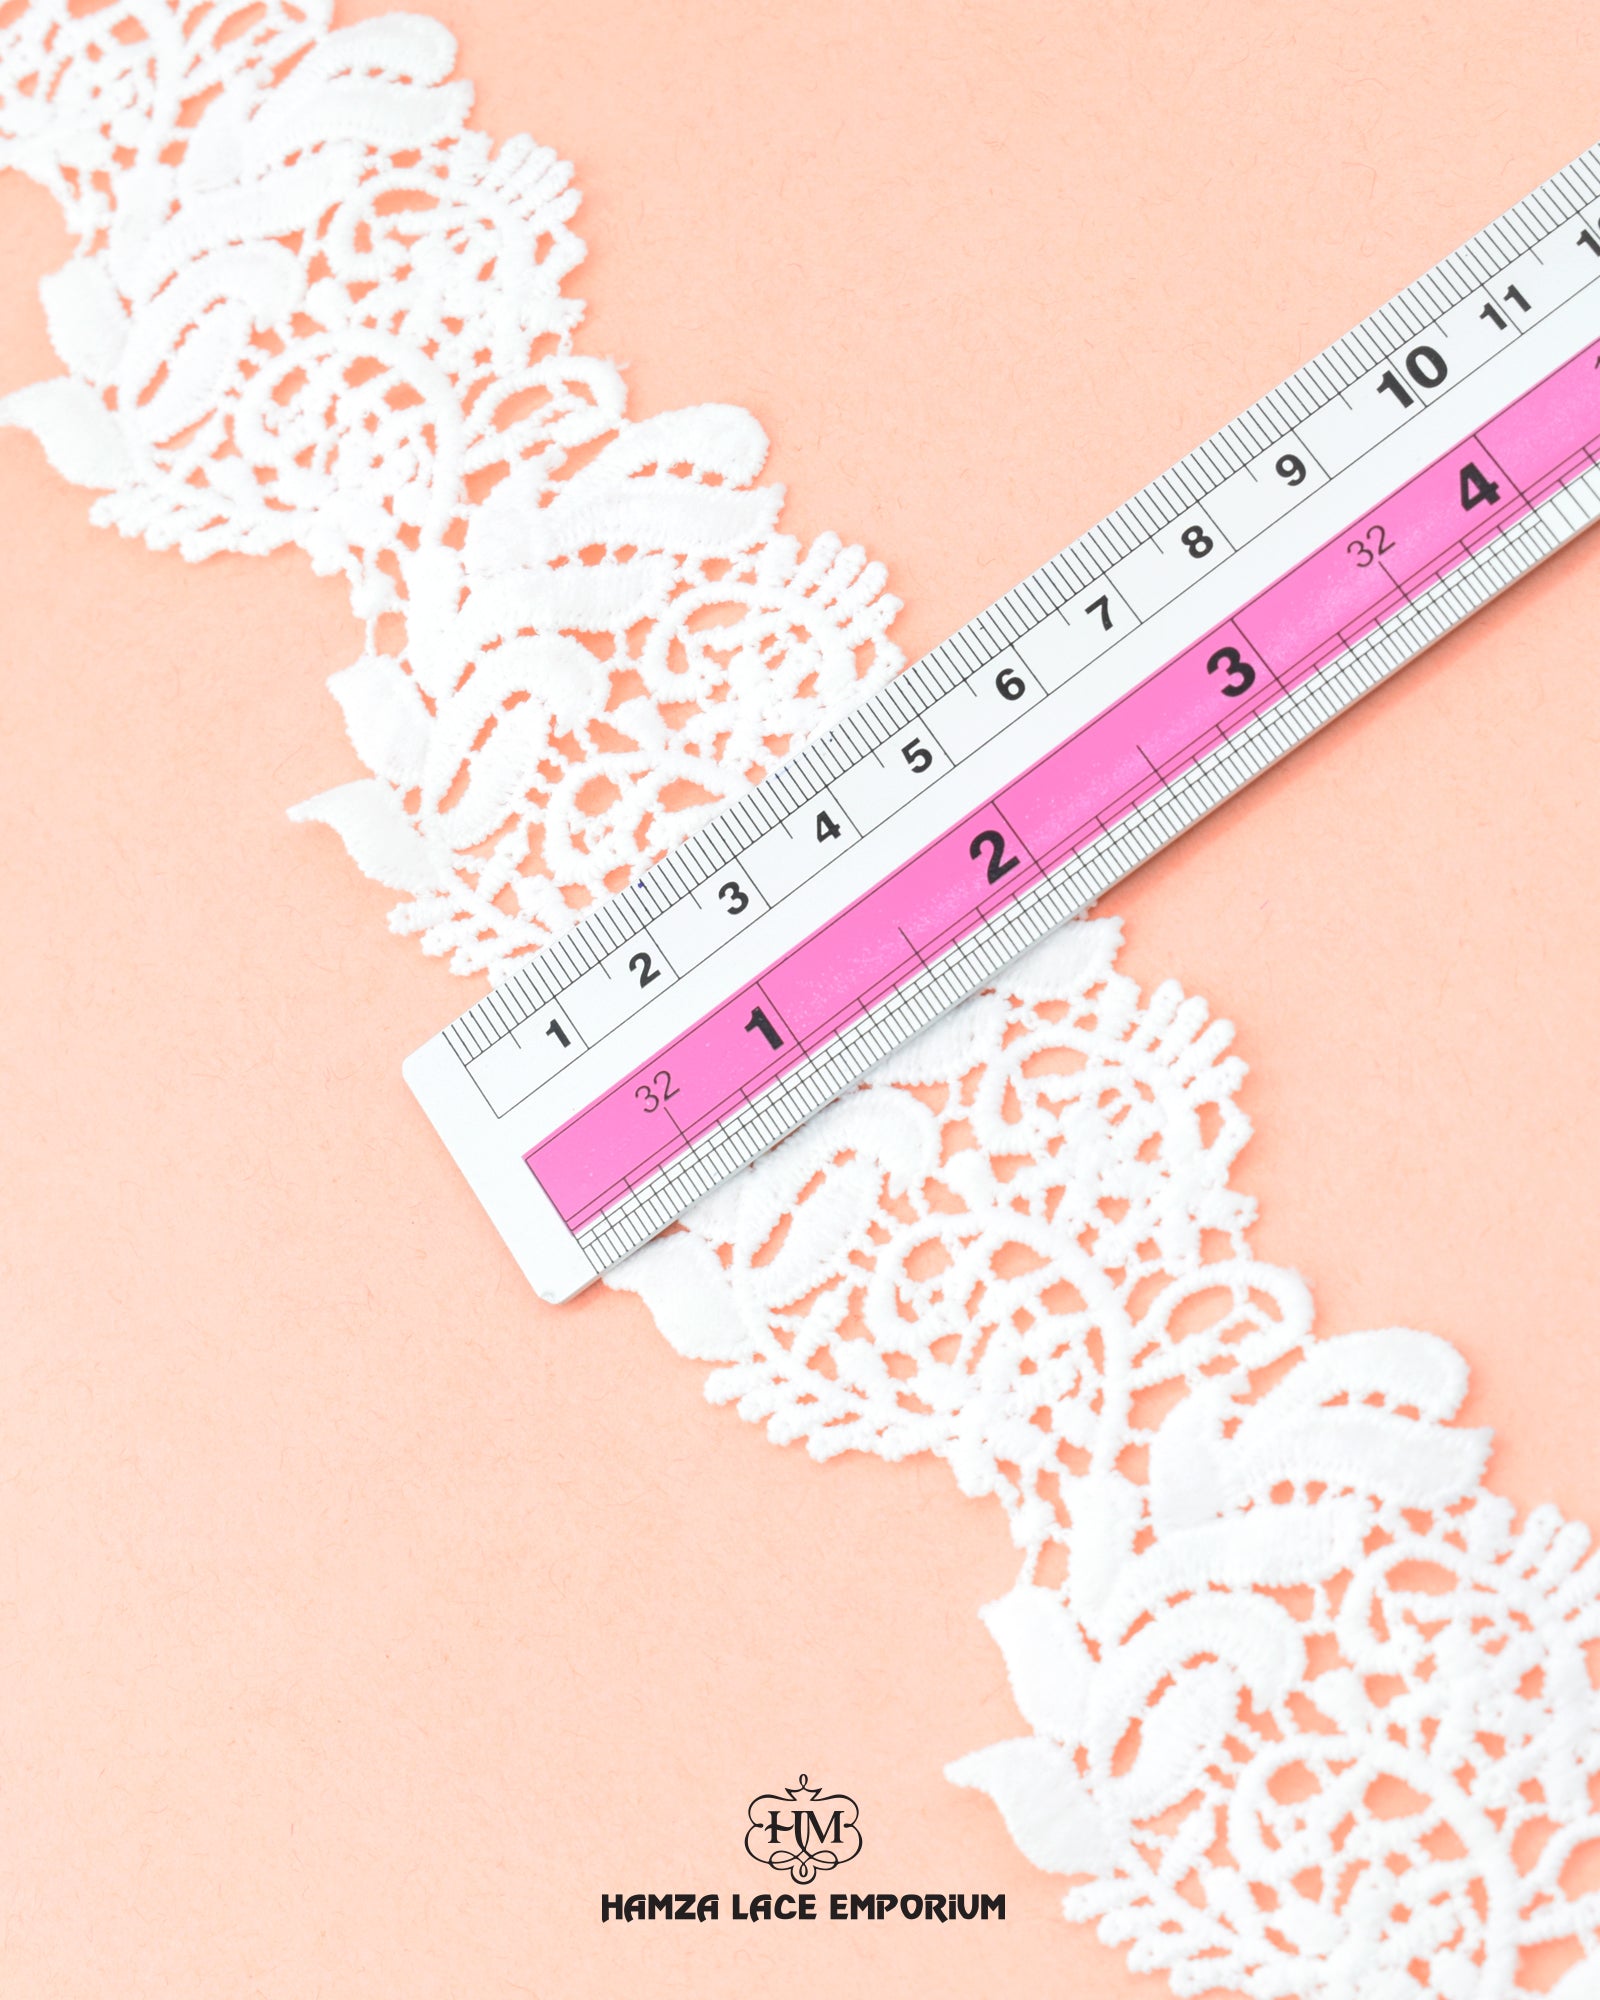 The size of the 'Center Filling Lace 22971' is given as '2' inches by placing a ruler on it